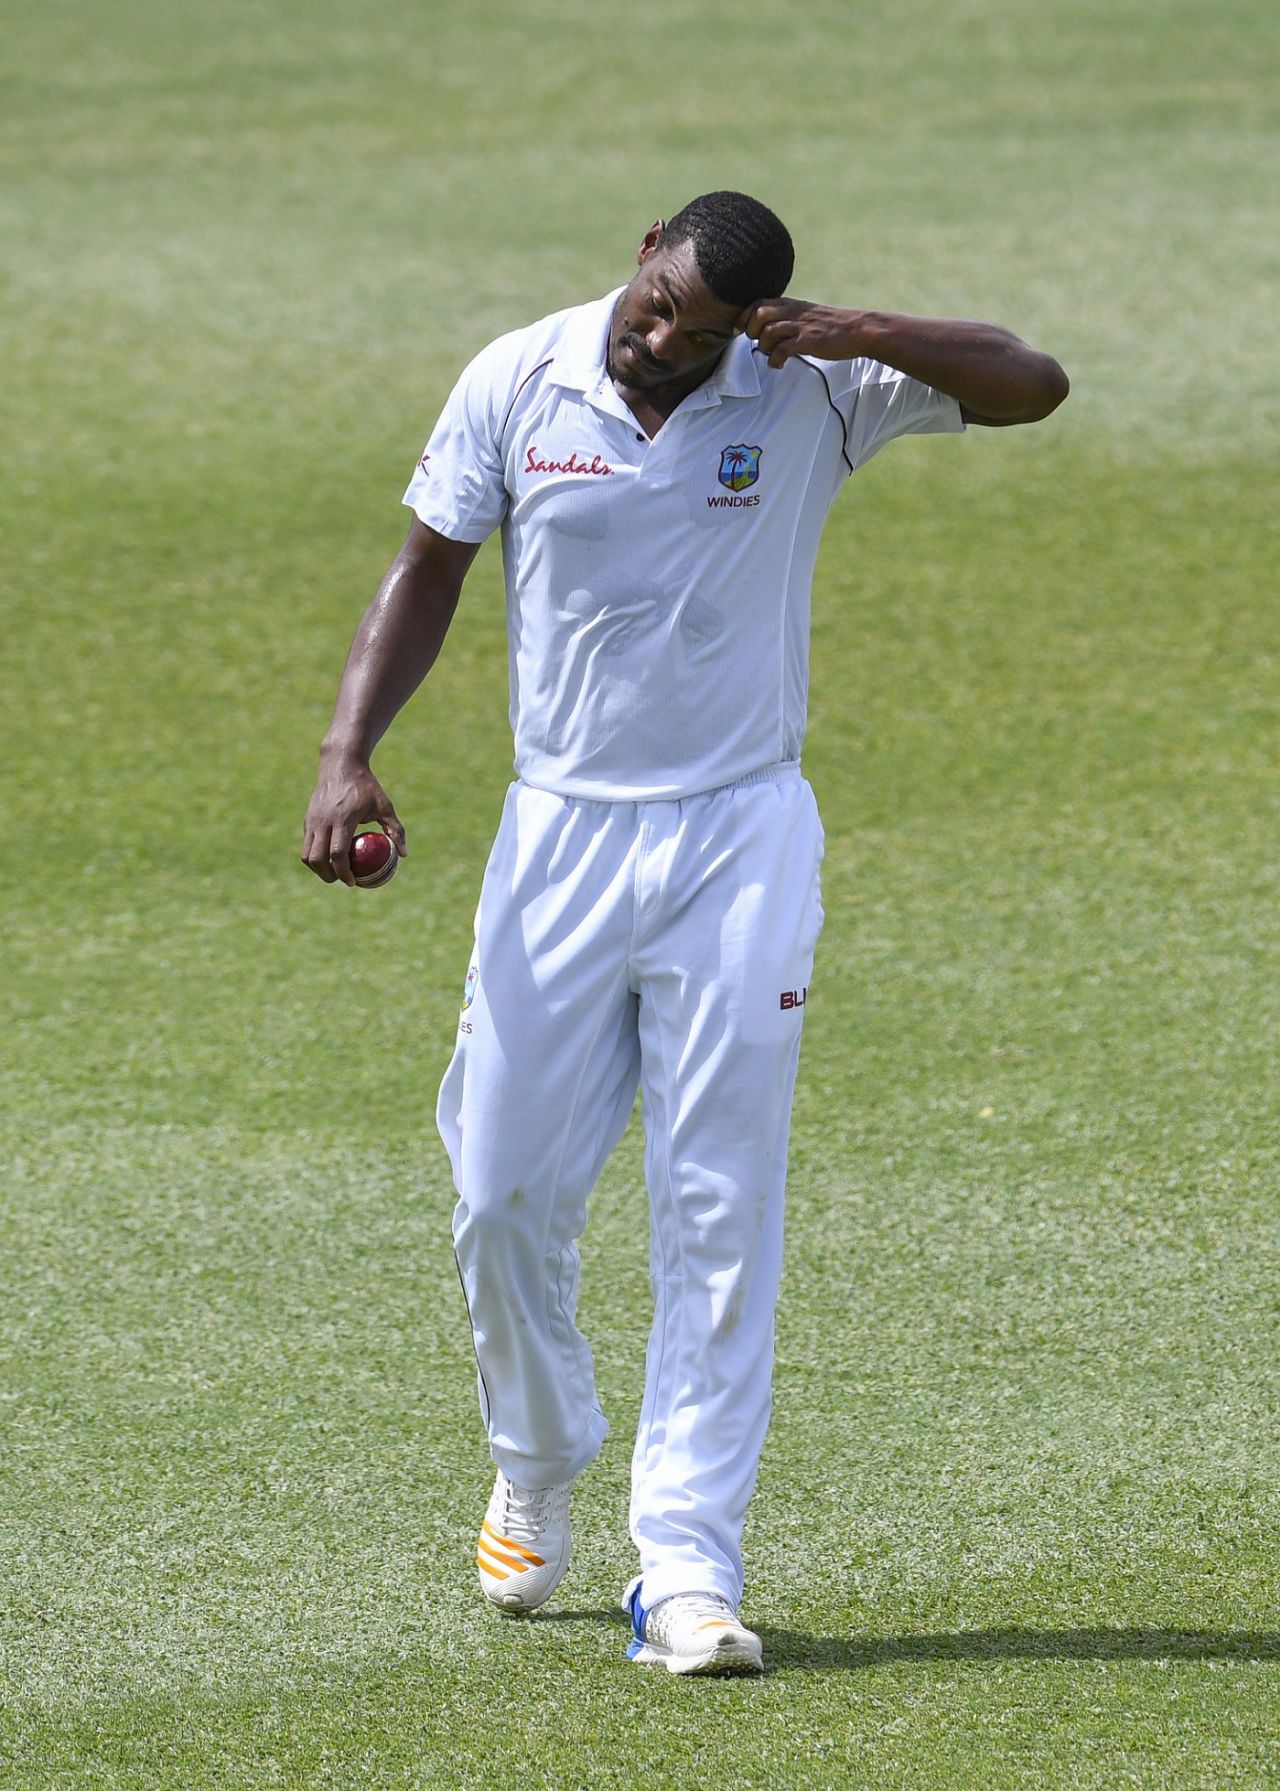 Shannon Gabriel bowled a hostile first spell, West Indies v Sri Lanka, 2nd Test, St Lucia, 4th day, June 17, 2018